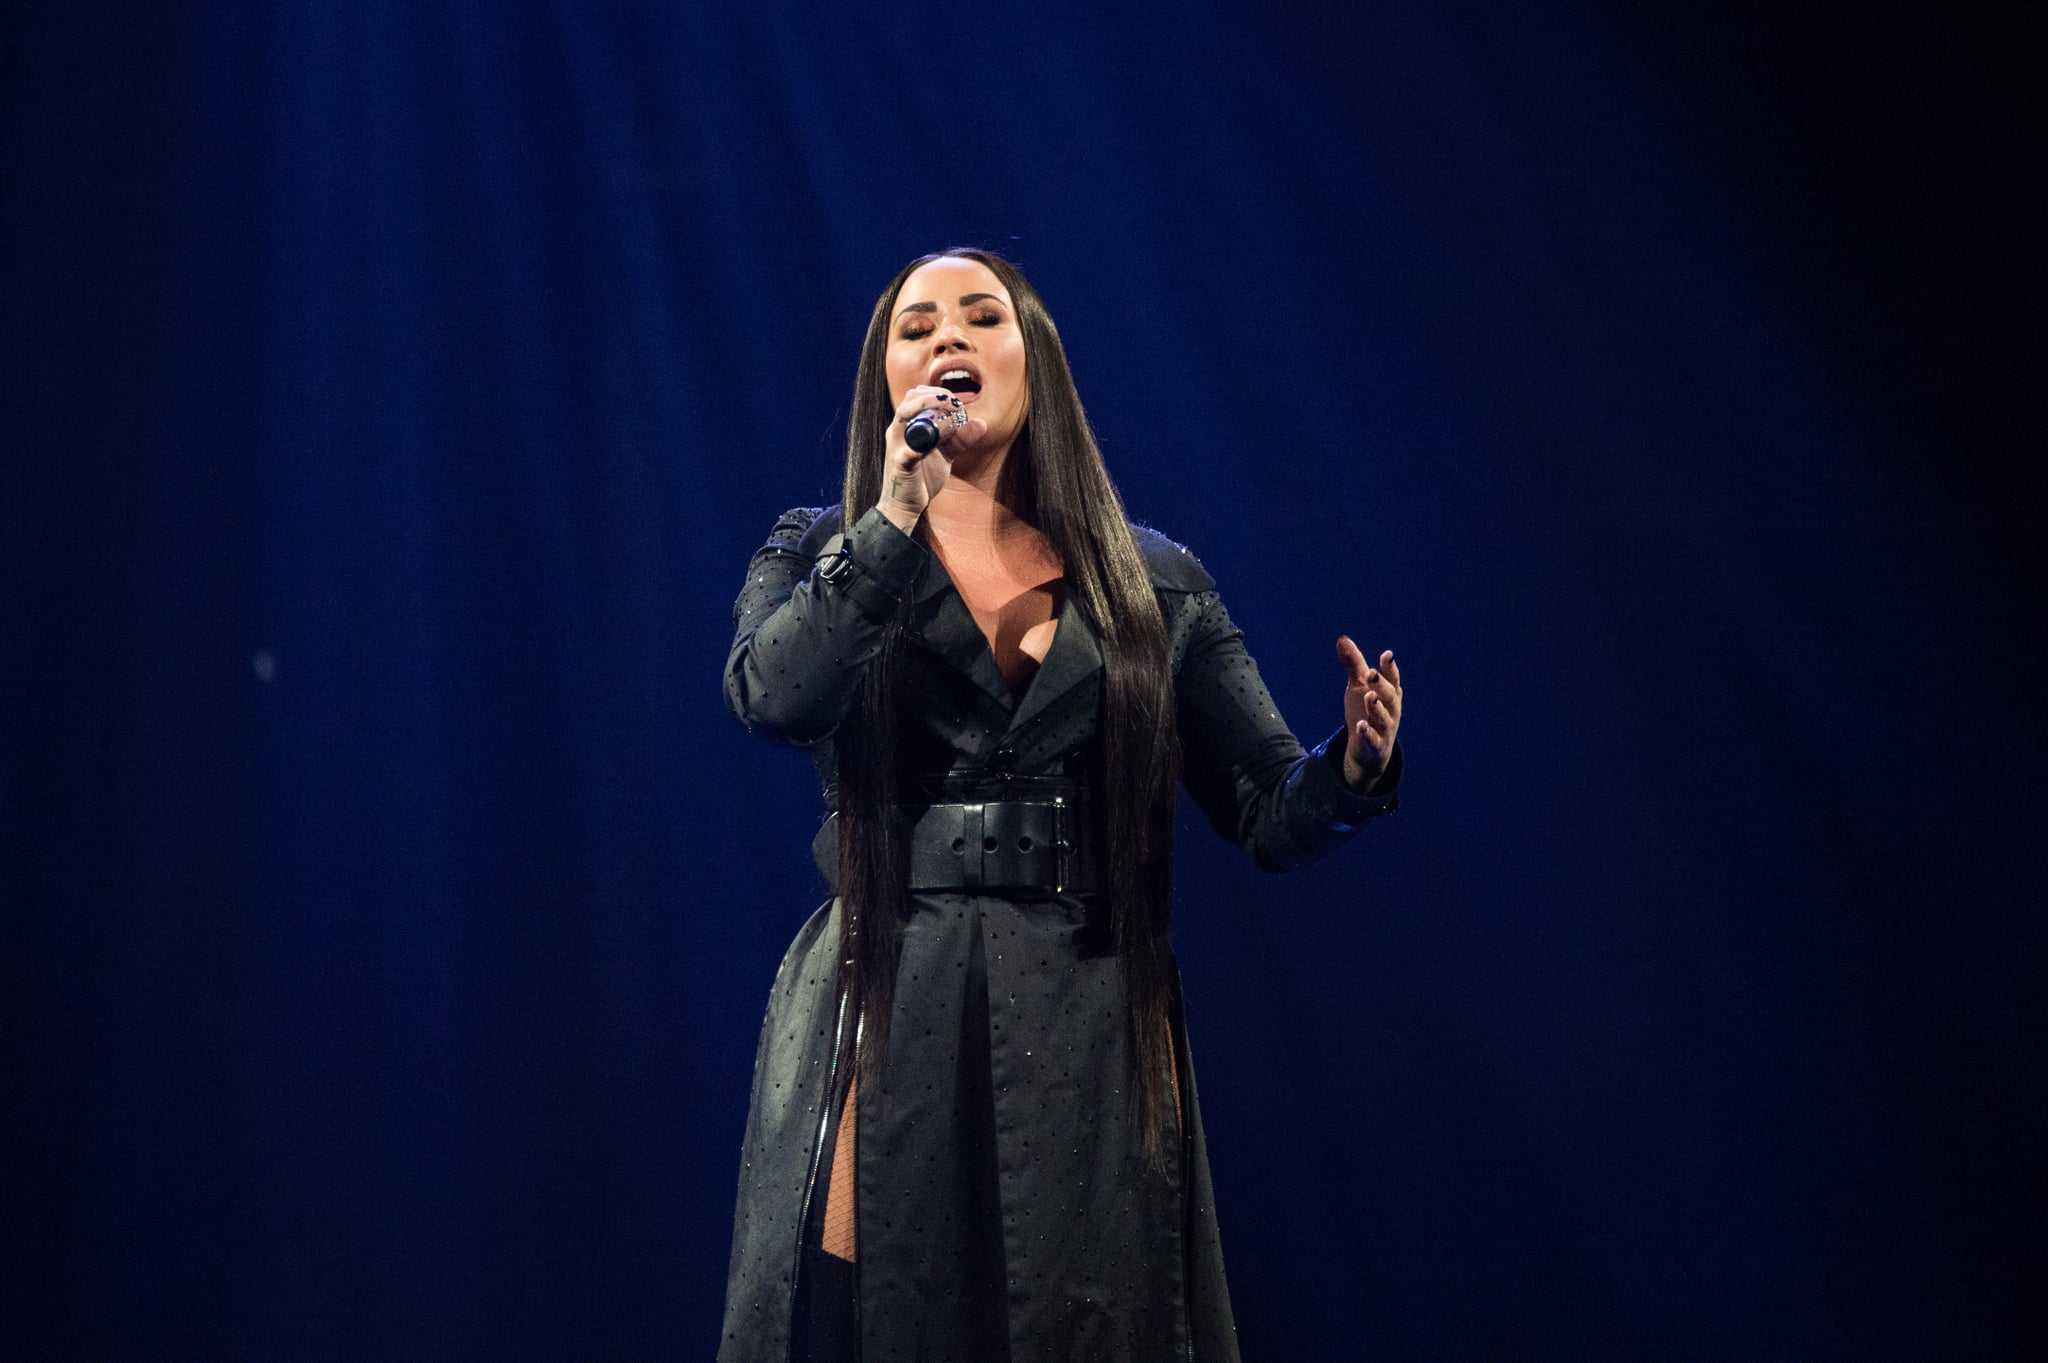 BIRMINGHAM, ENGLAND - JUNE 29:  Demi Lovato performs on stage during her Tell Me That You Love Me tour at Arena Birmingham on June 29, 2018 in Birmingham, England.  (Photo by Joseph Okpako/WireImage)